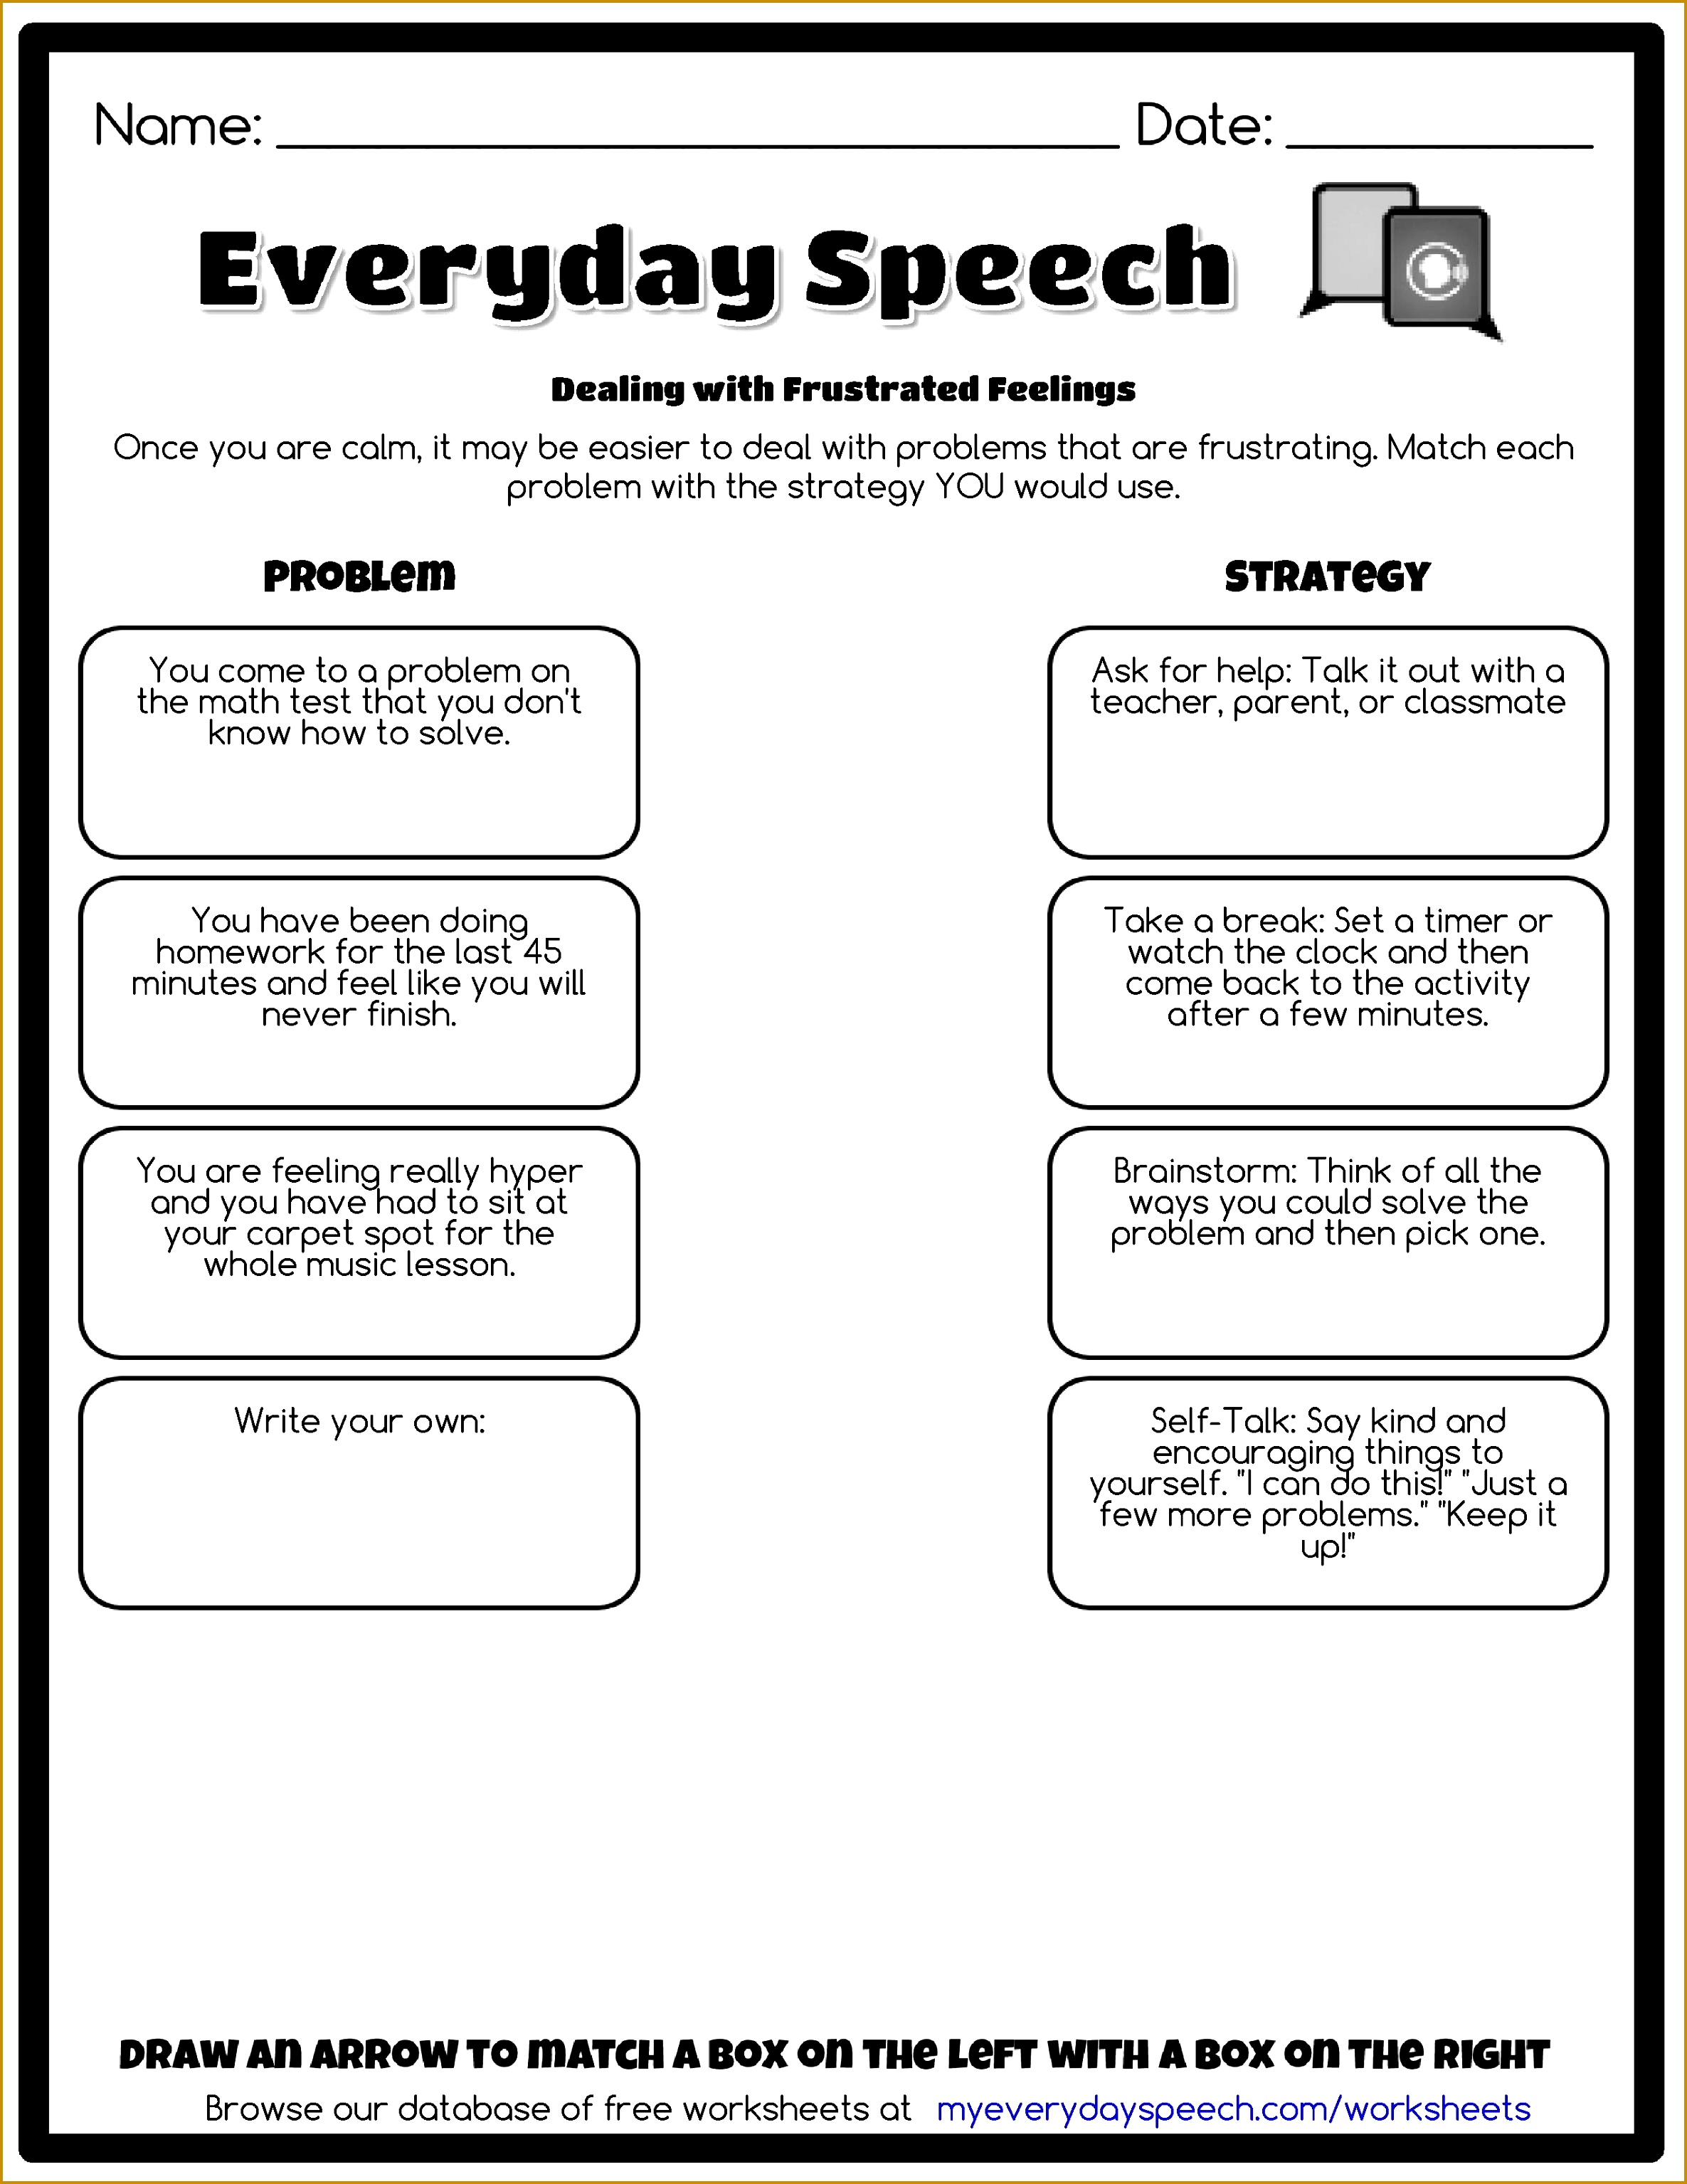 Check out the worksheet I just made using Everyday Speech s worksheet creator Dealing with Frustrated 30692371